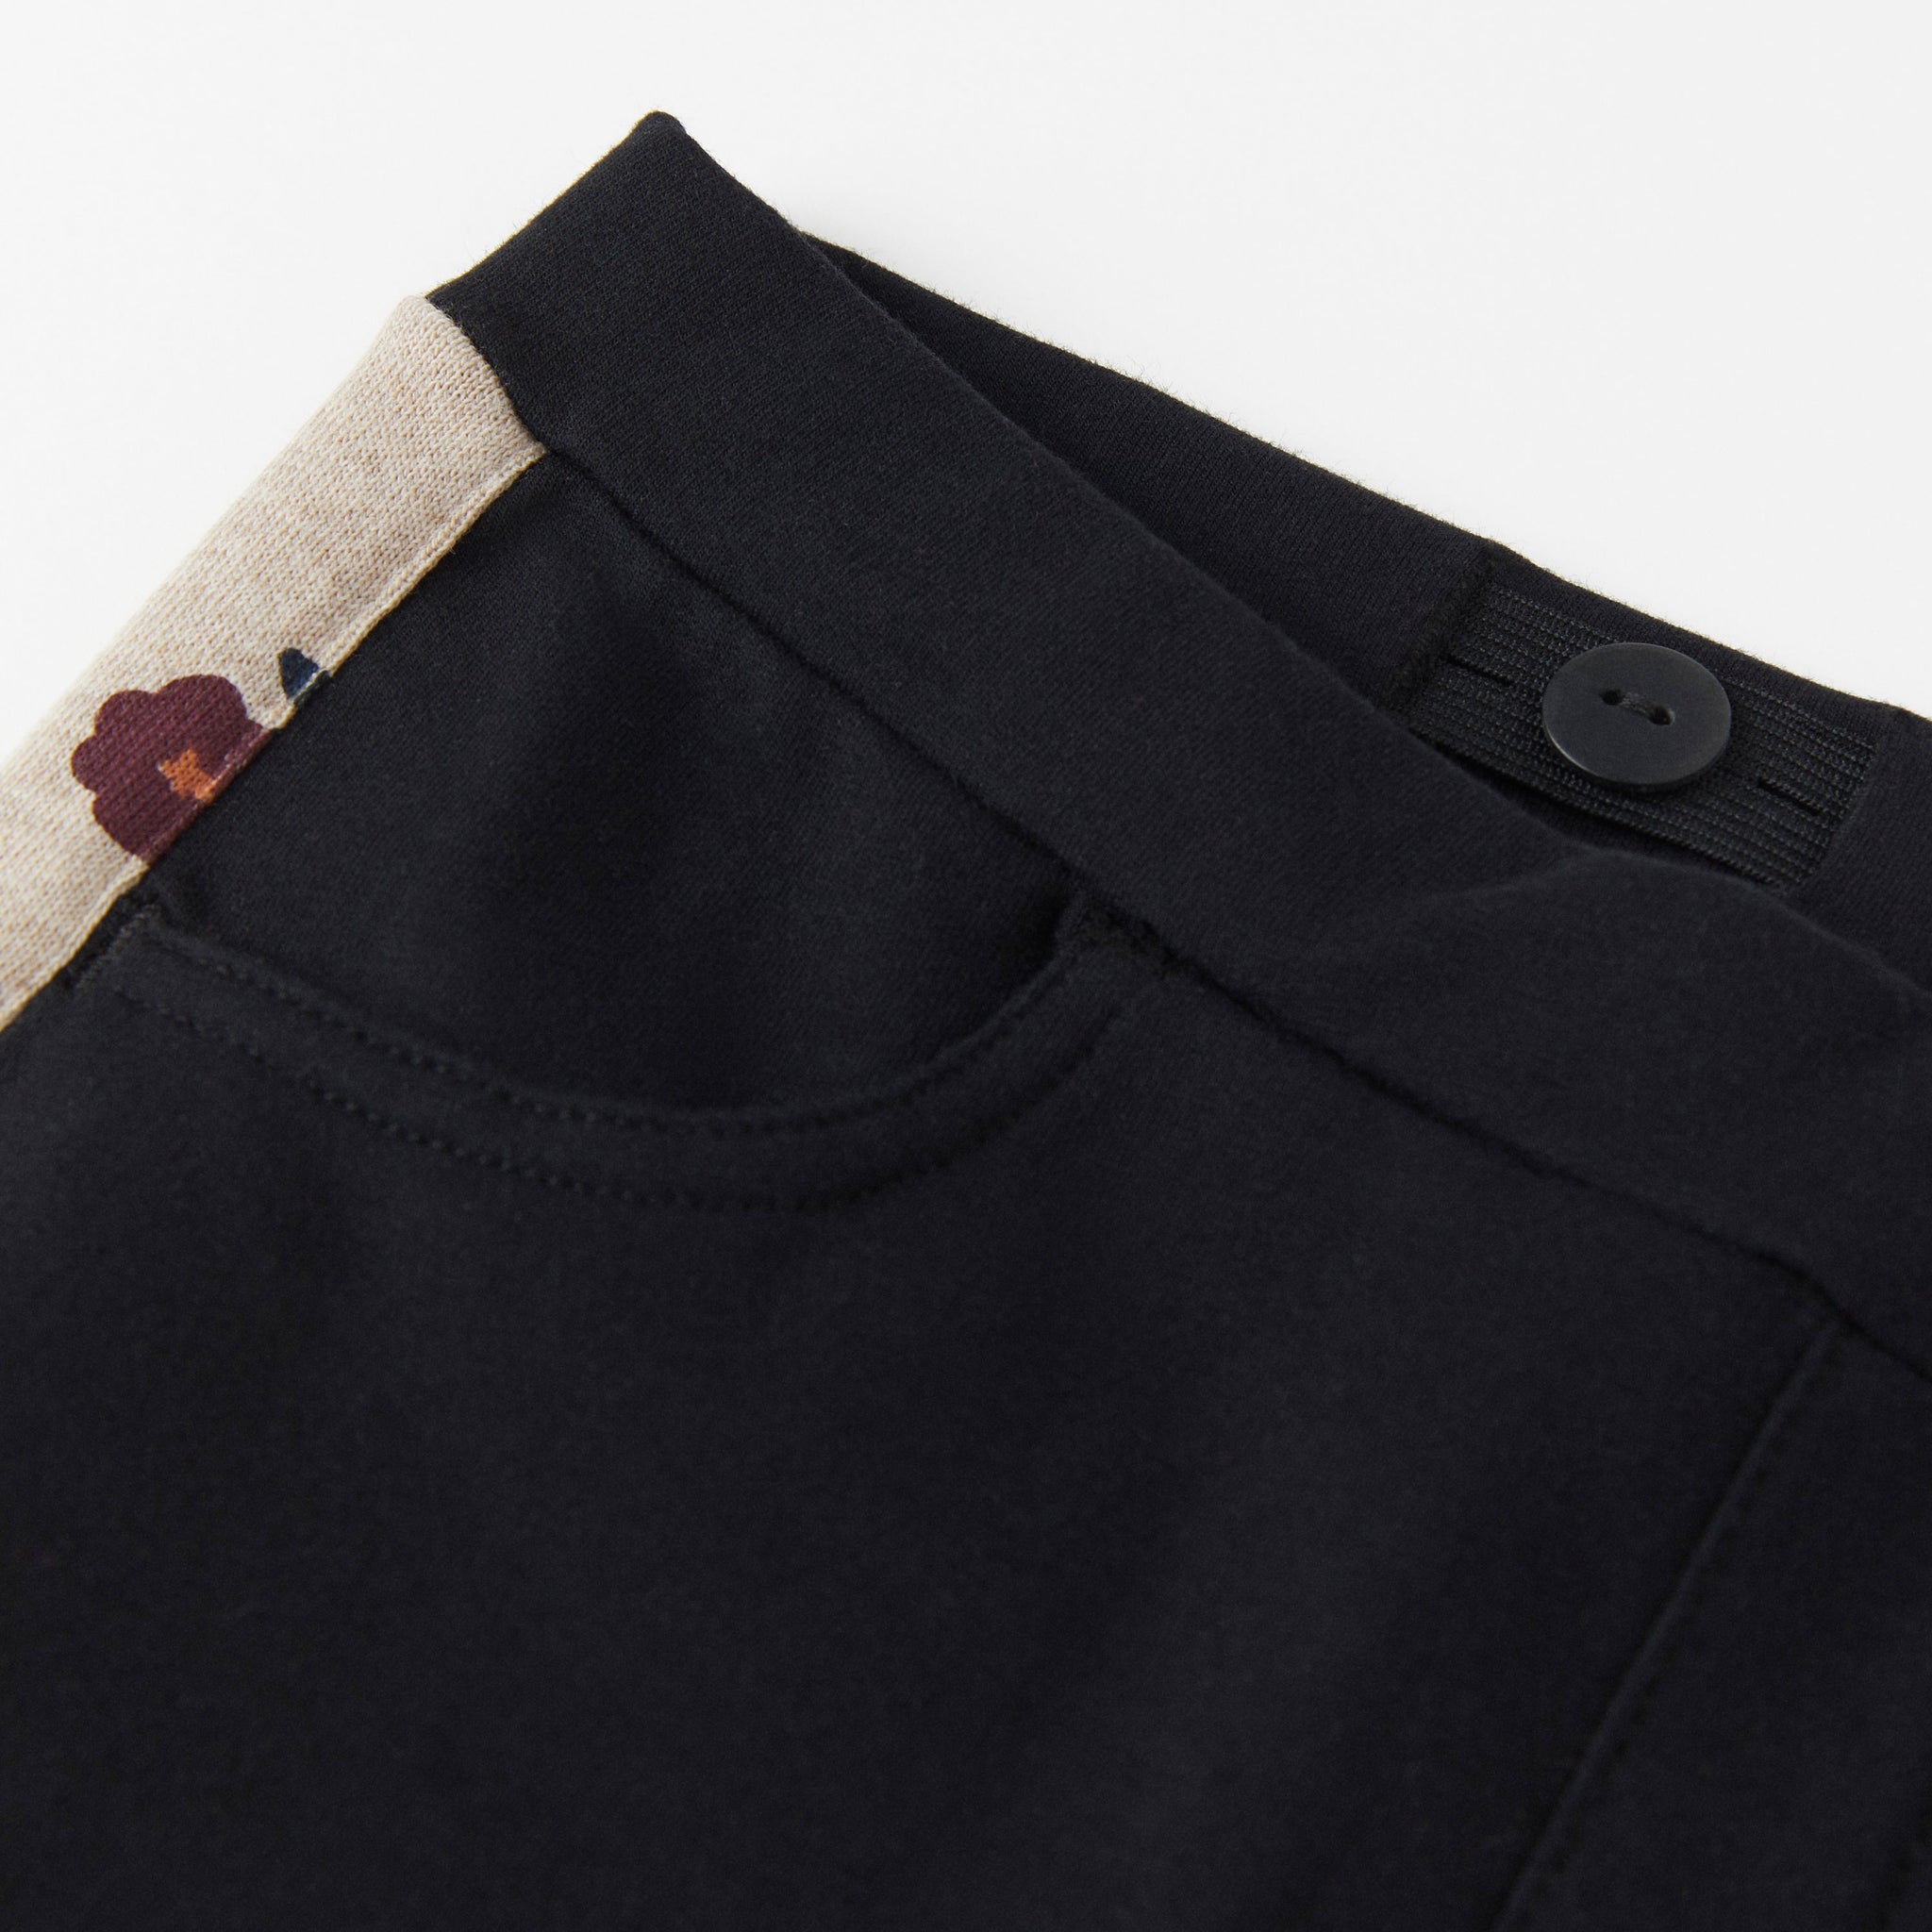 Organic Cotton Kids Black Trousers from the Polarn O. Pyret Kidswear collection. Ethically produced kids clothing.